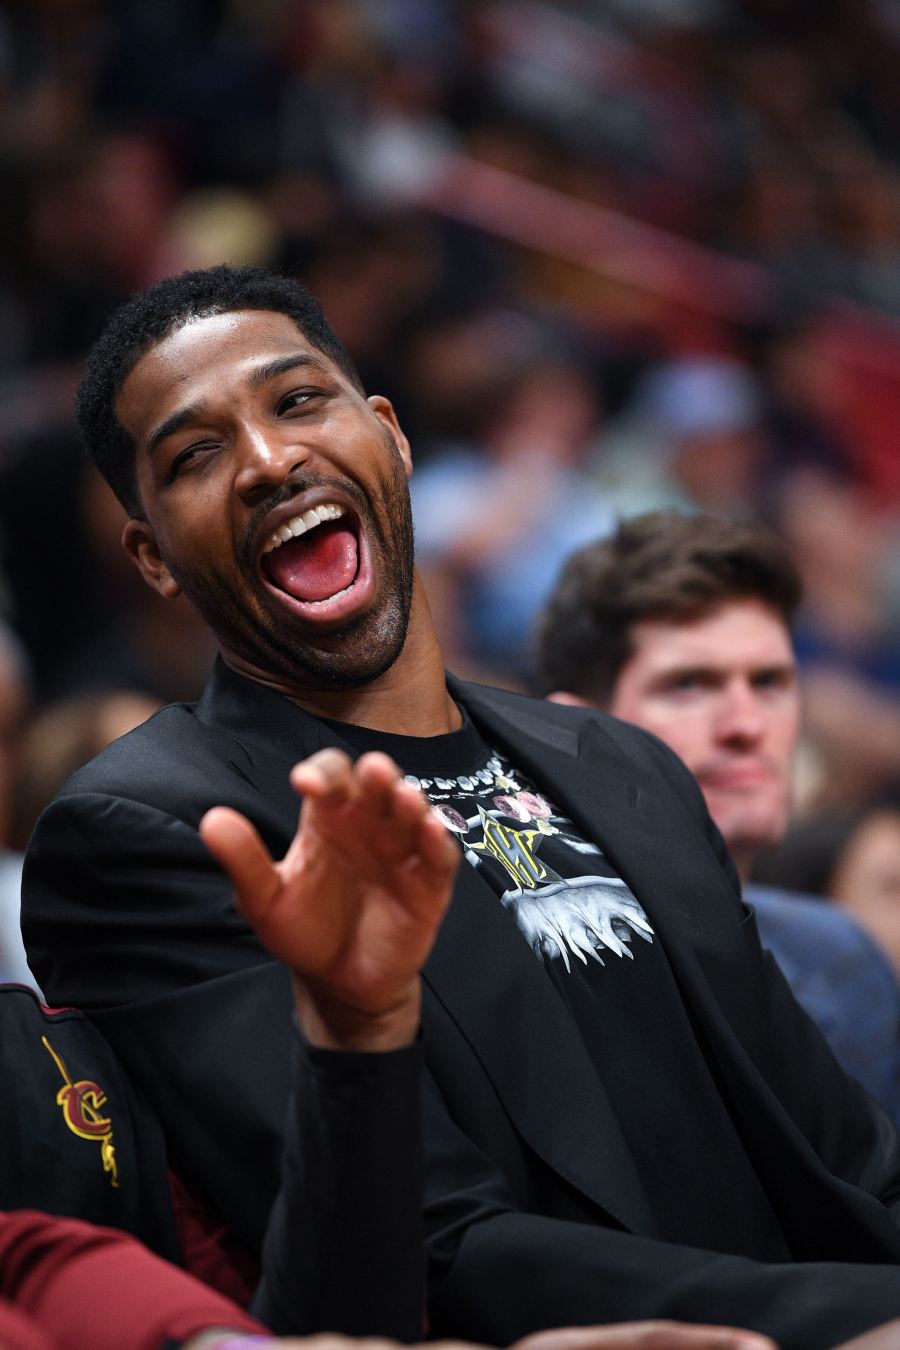 Tristan Thompson All Smiles at Cavaliers Game in Miami: Pics